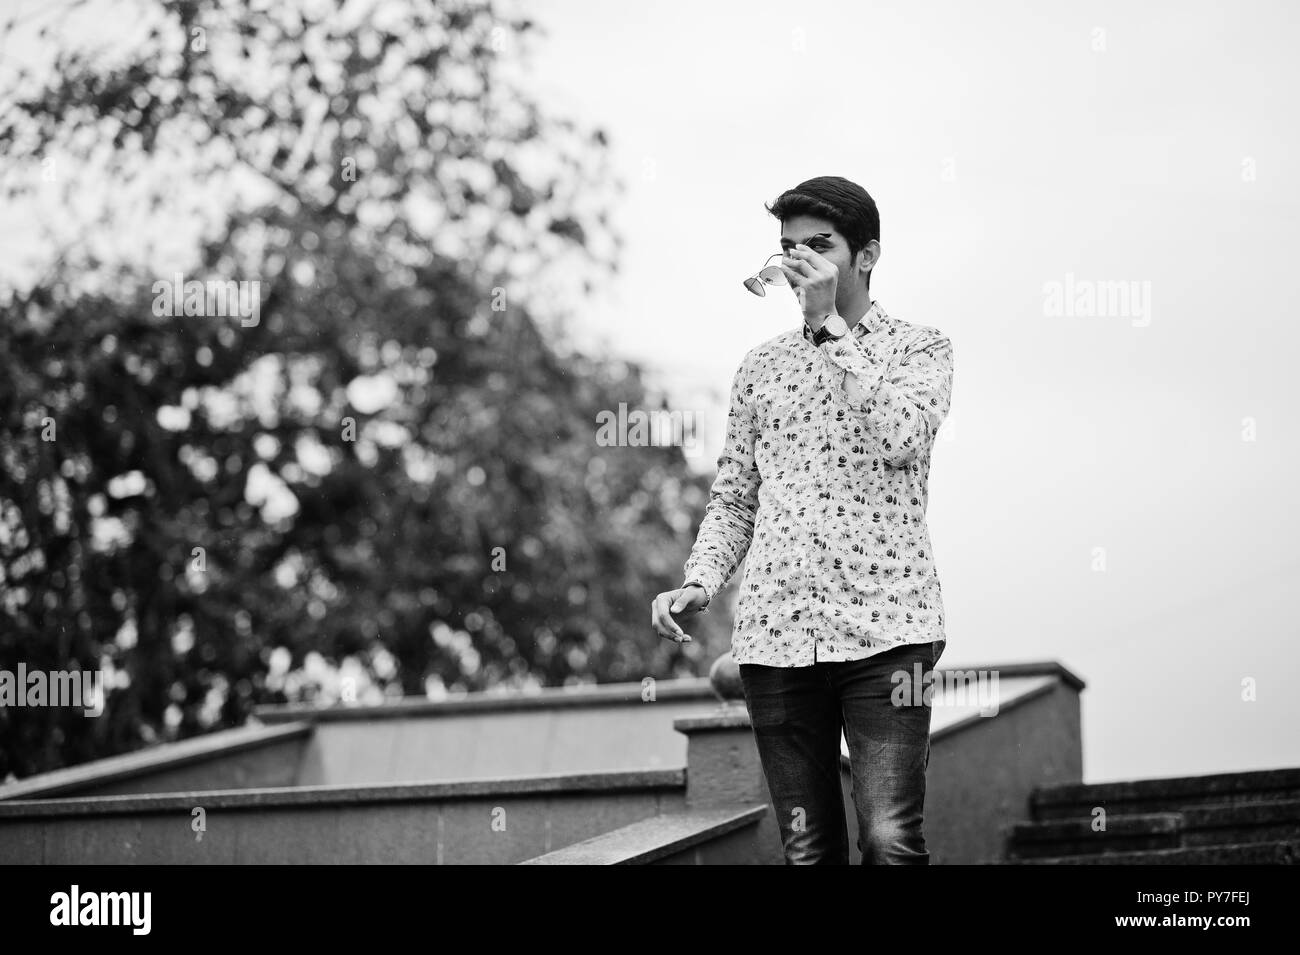 Indian man student at shirt and sunglasses posed outdoor. Black and white photo. Stock Photo